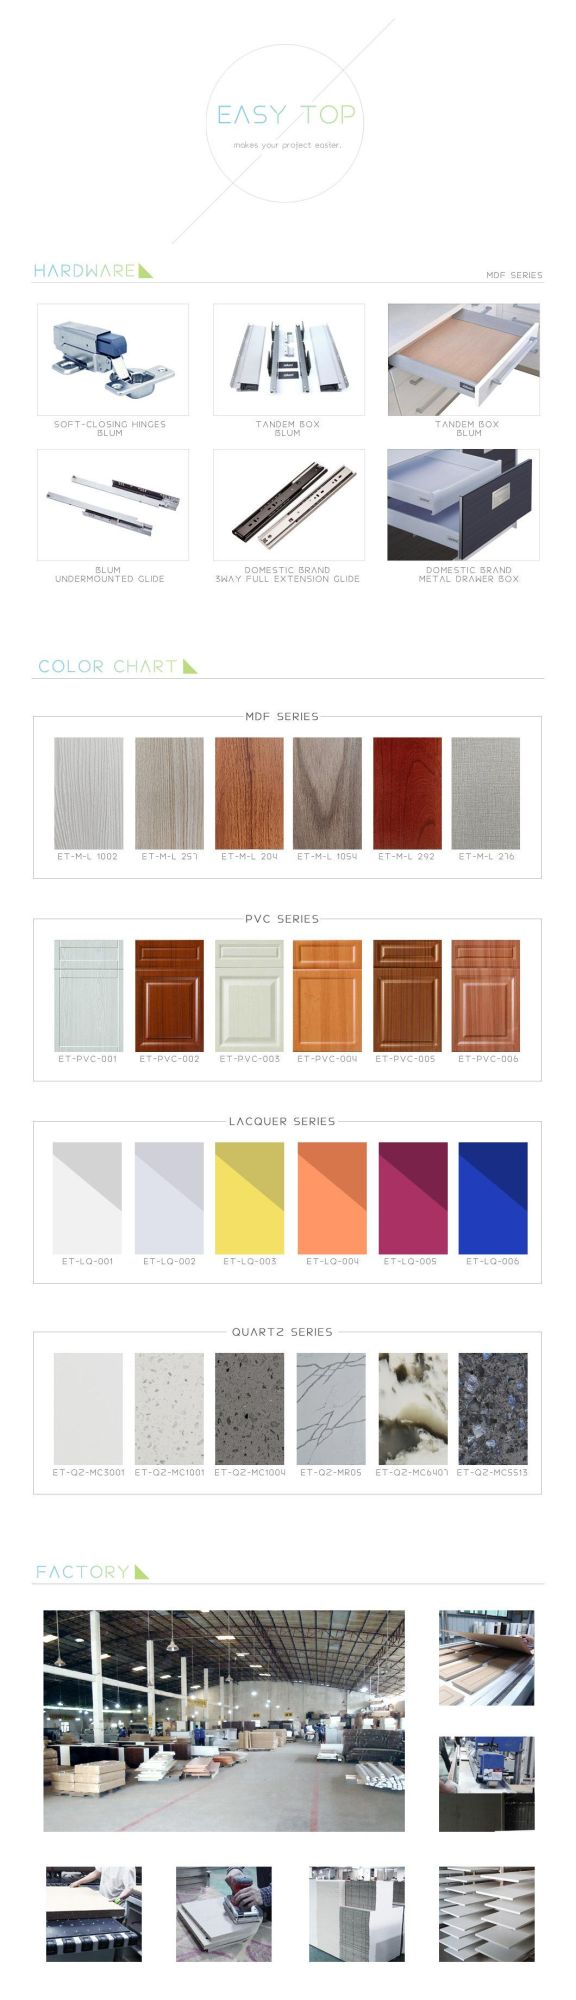 Affordable Small White Cupboard Solid Wood Modern Design Modular Kitchen Cabinets Furniture